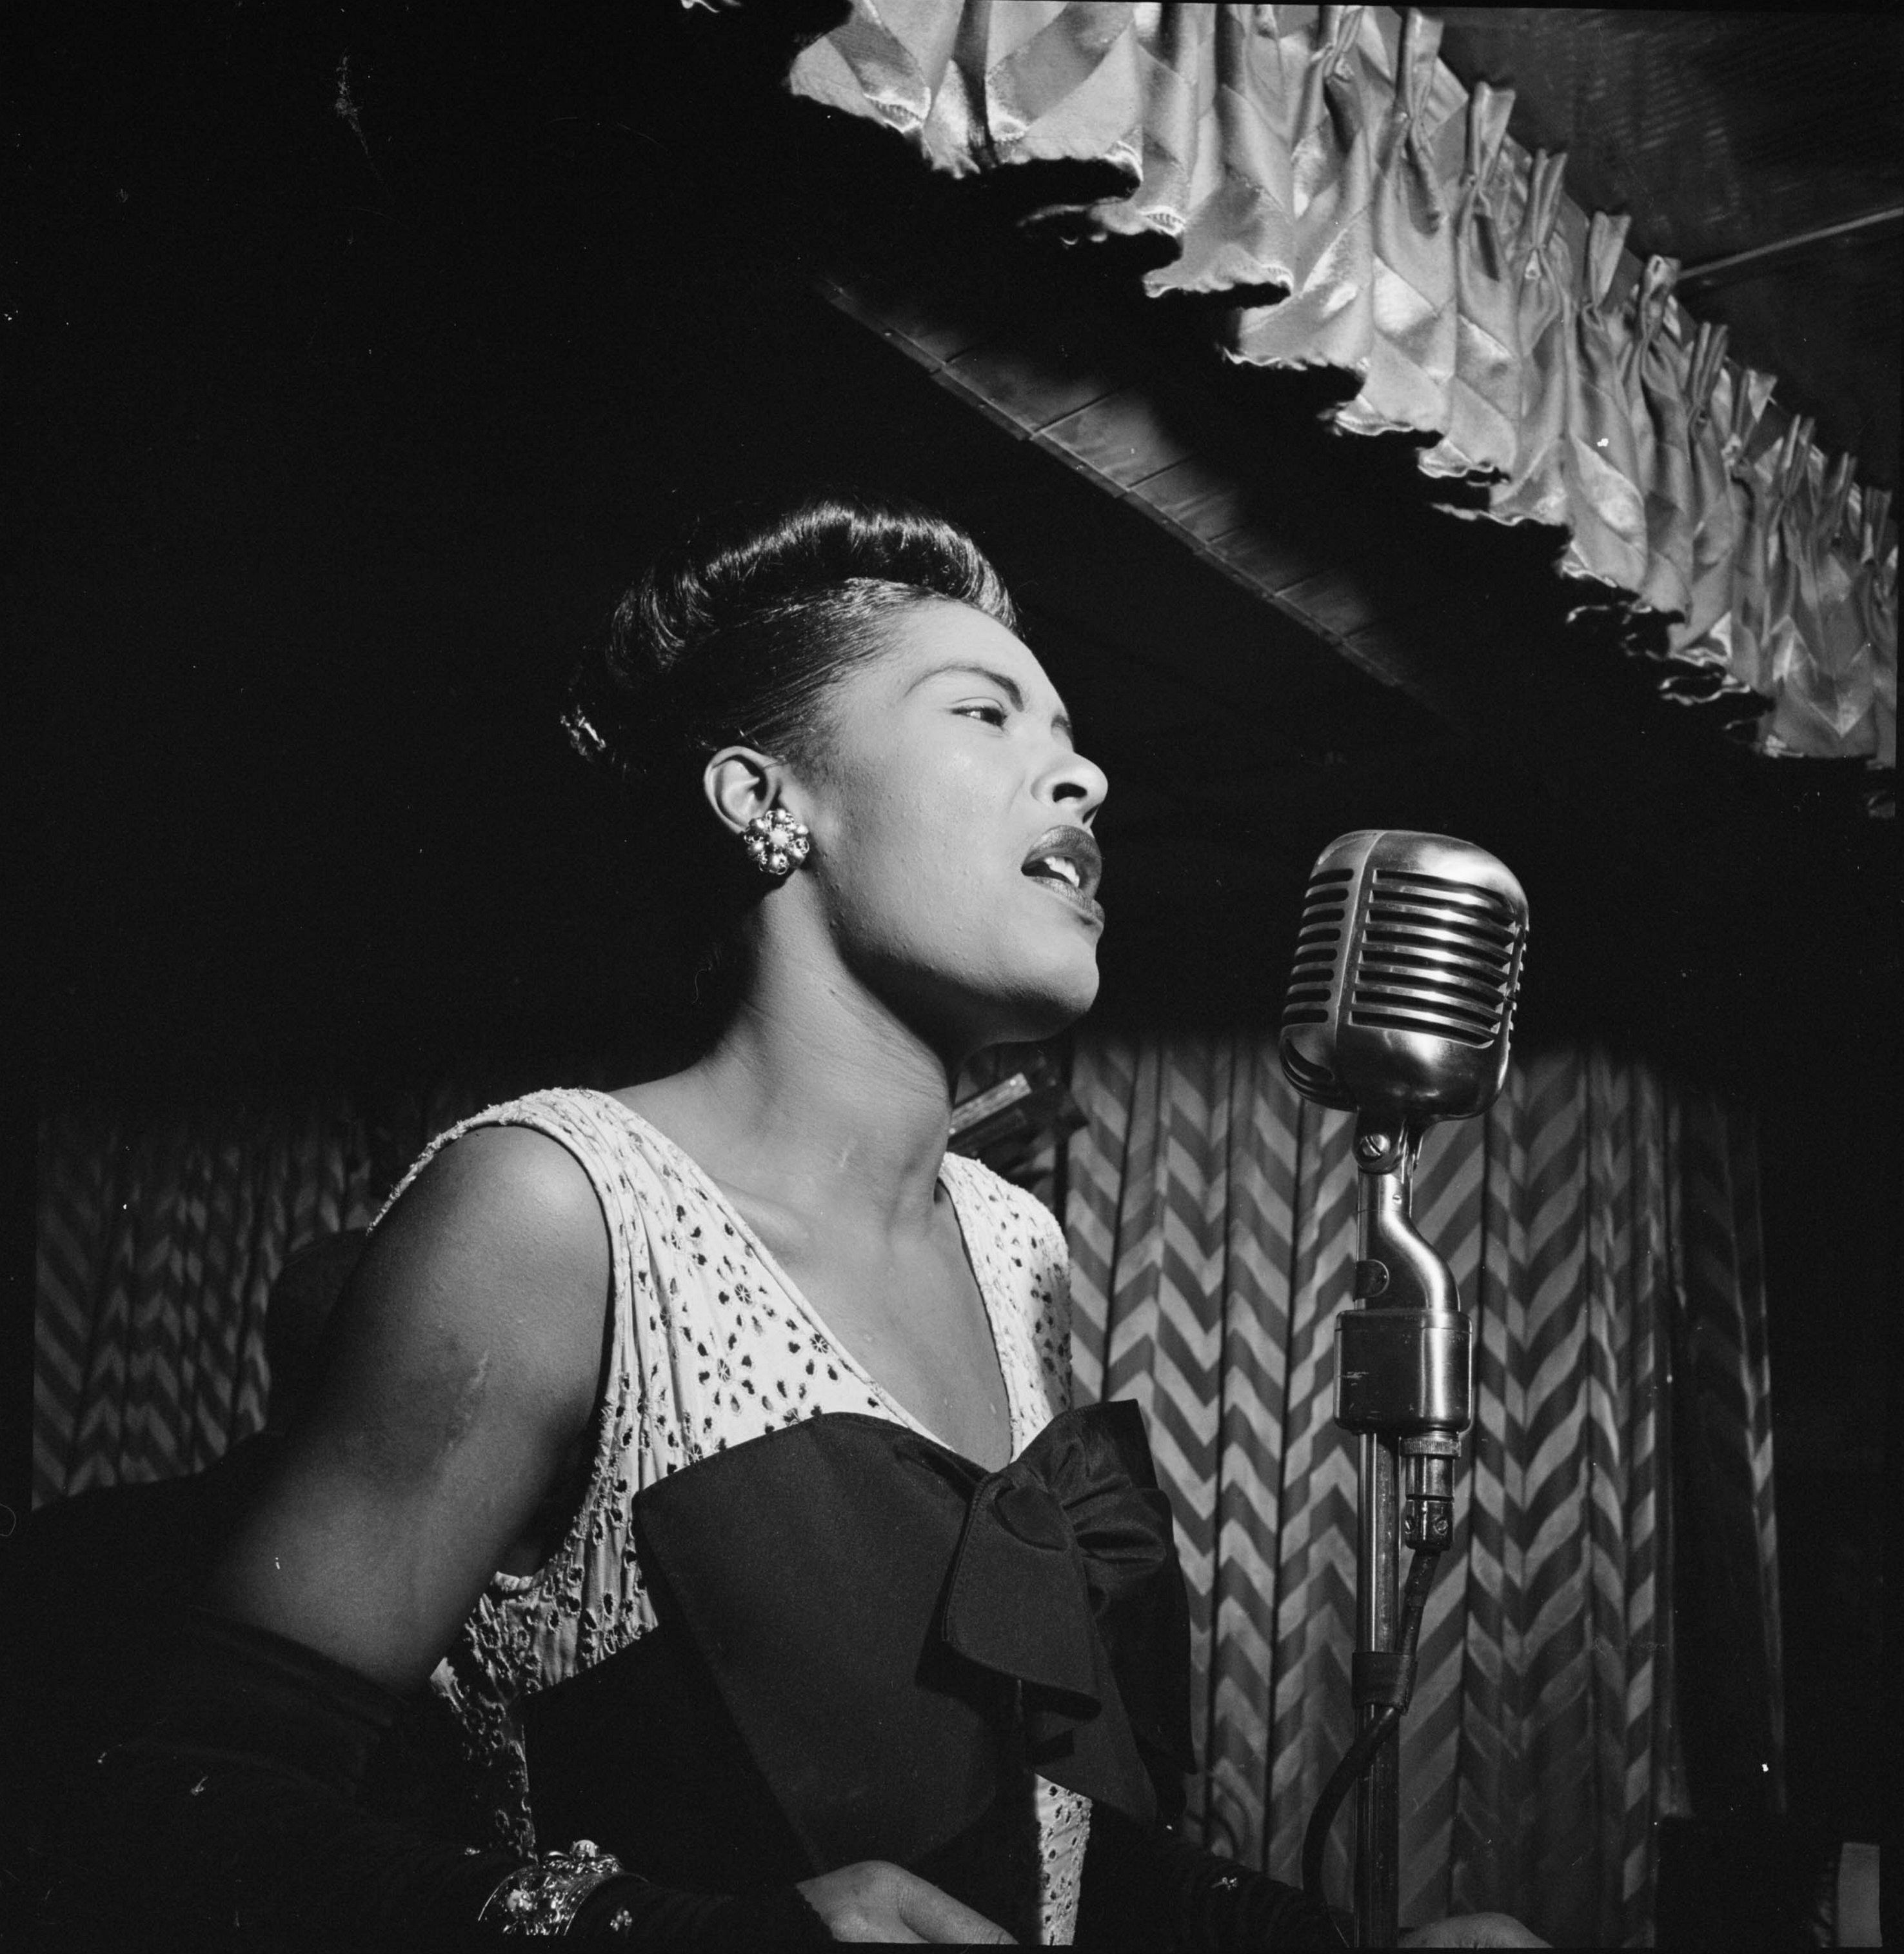 Billie Holiday (1915 - 1959) performing at the Club Downbeat in Manhattan. | Source: Getty Images